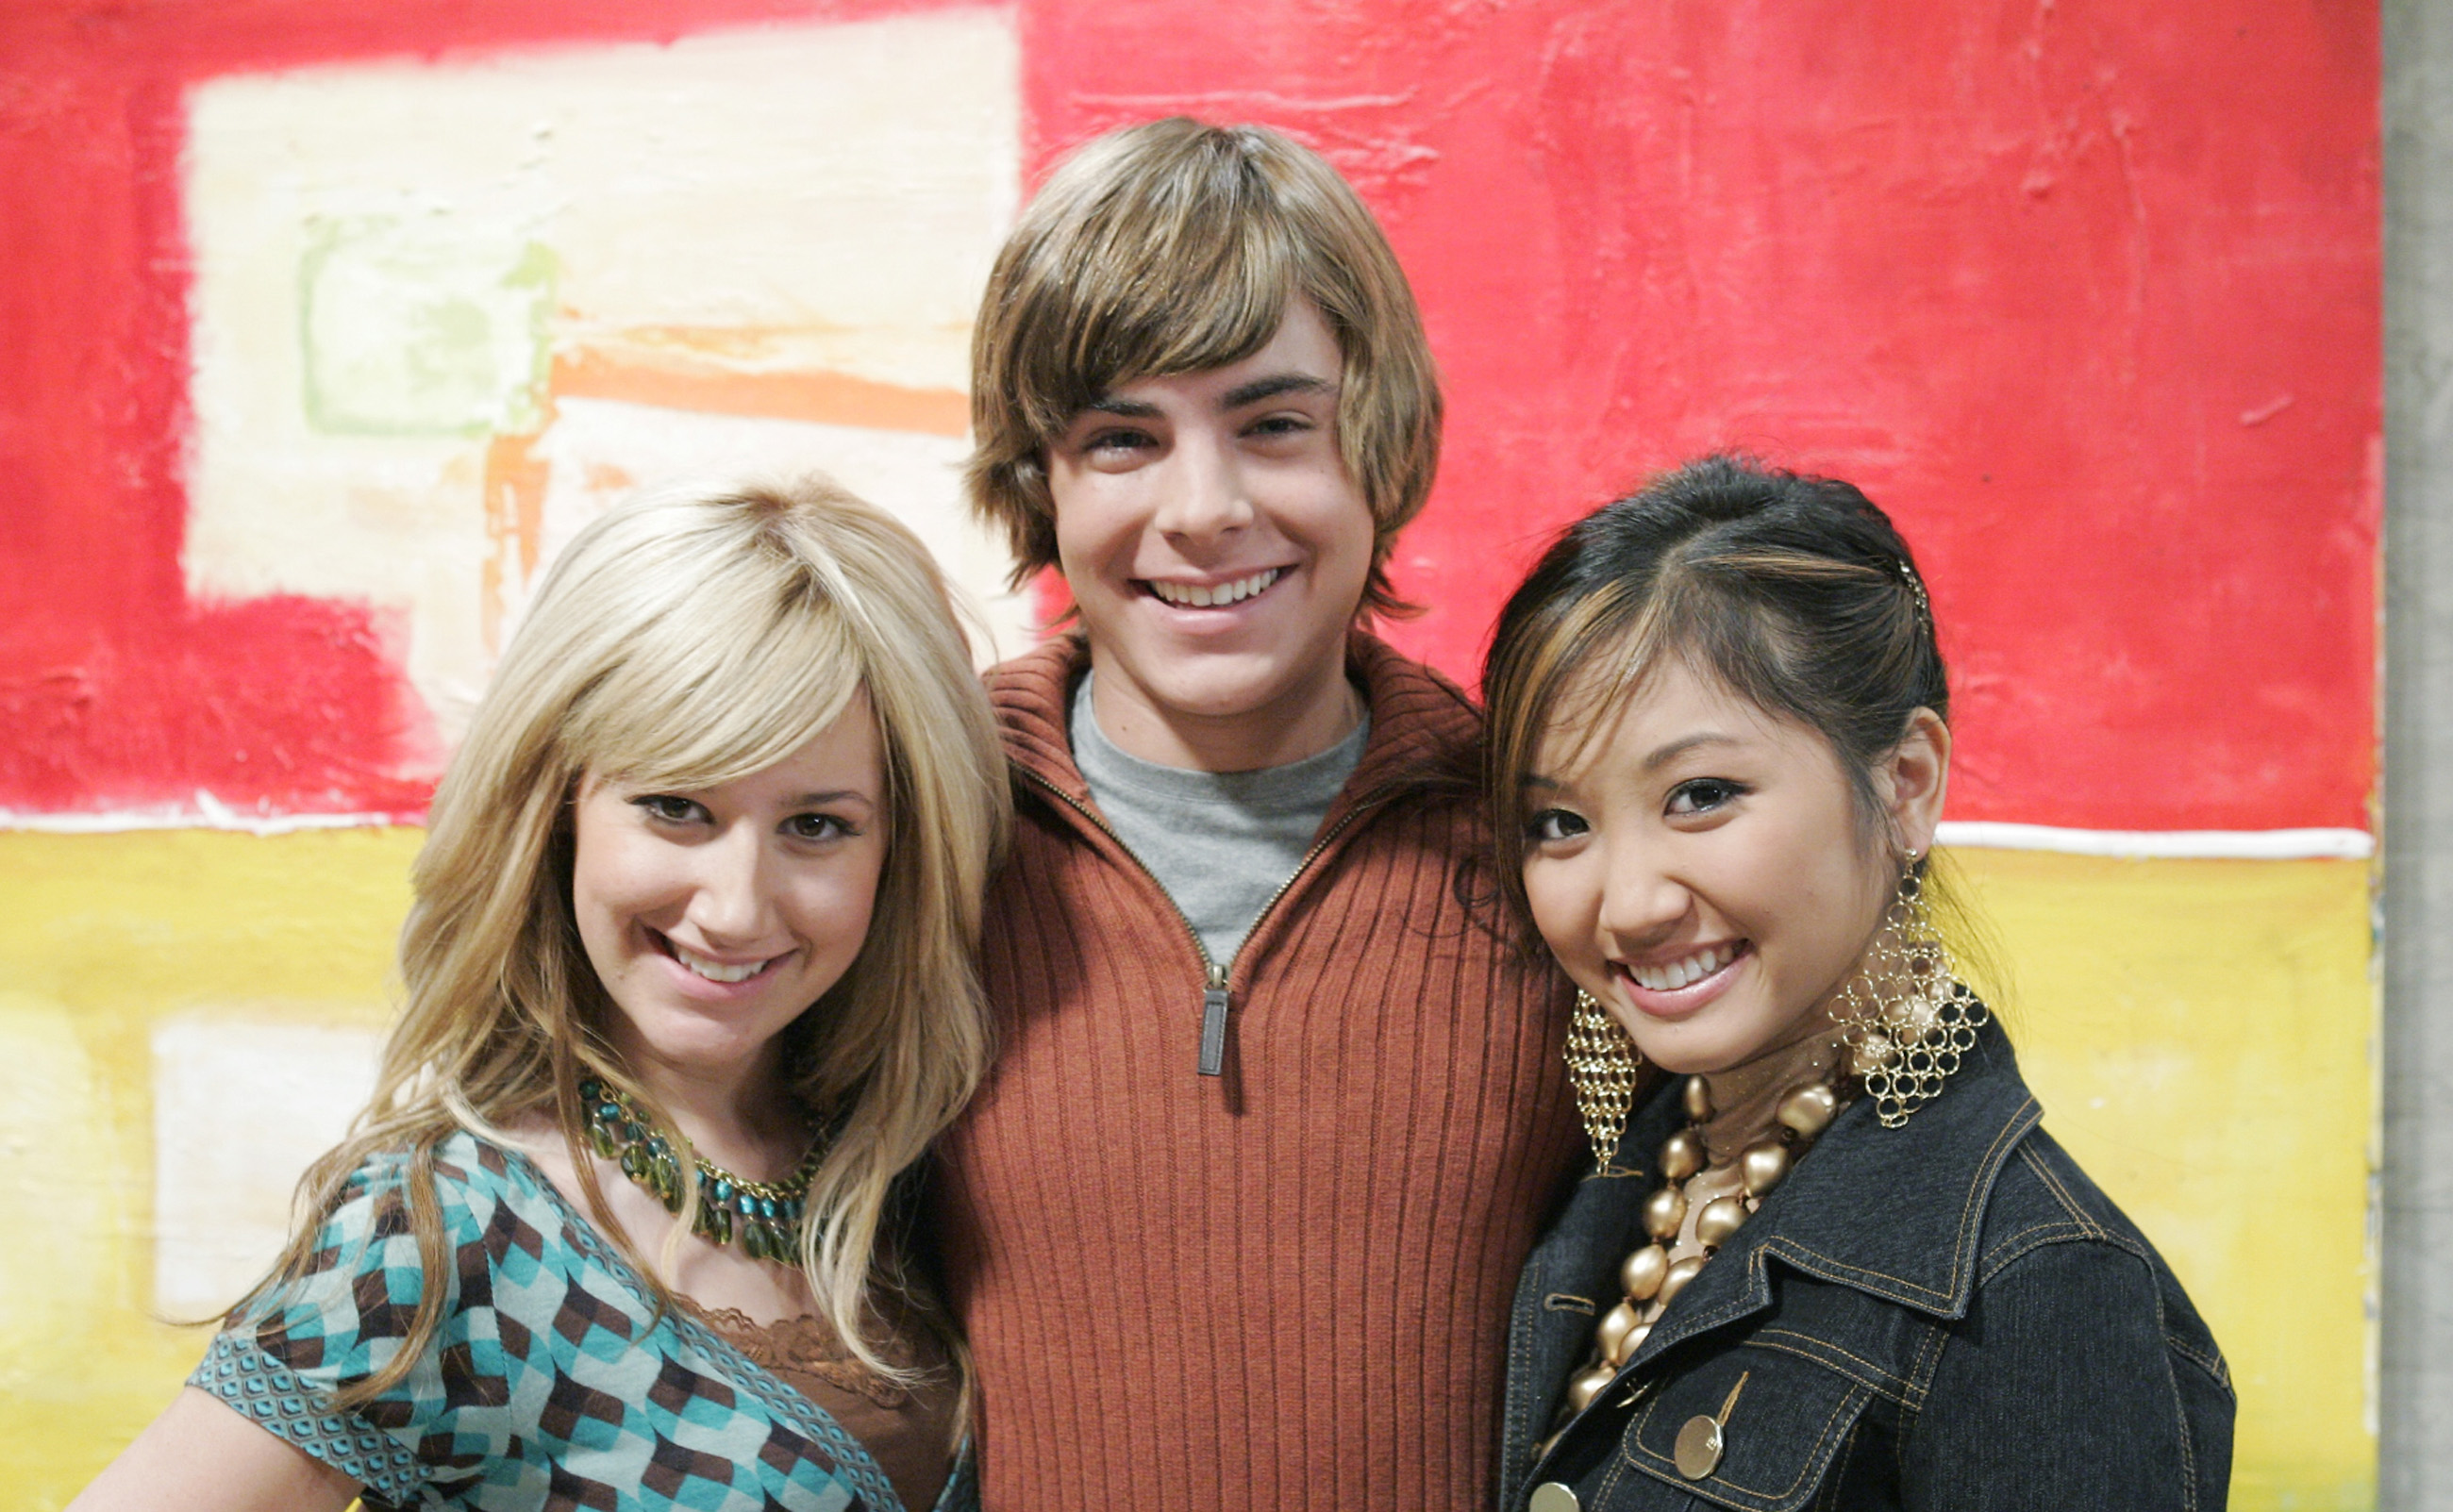 Zac Efron in The Suite Life of Zack and Cody, episode: Odd Couples